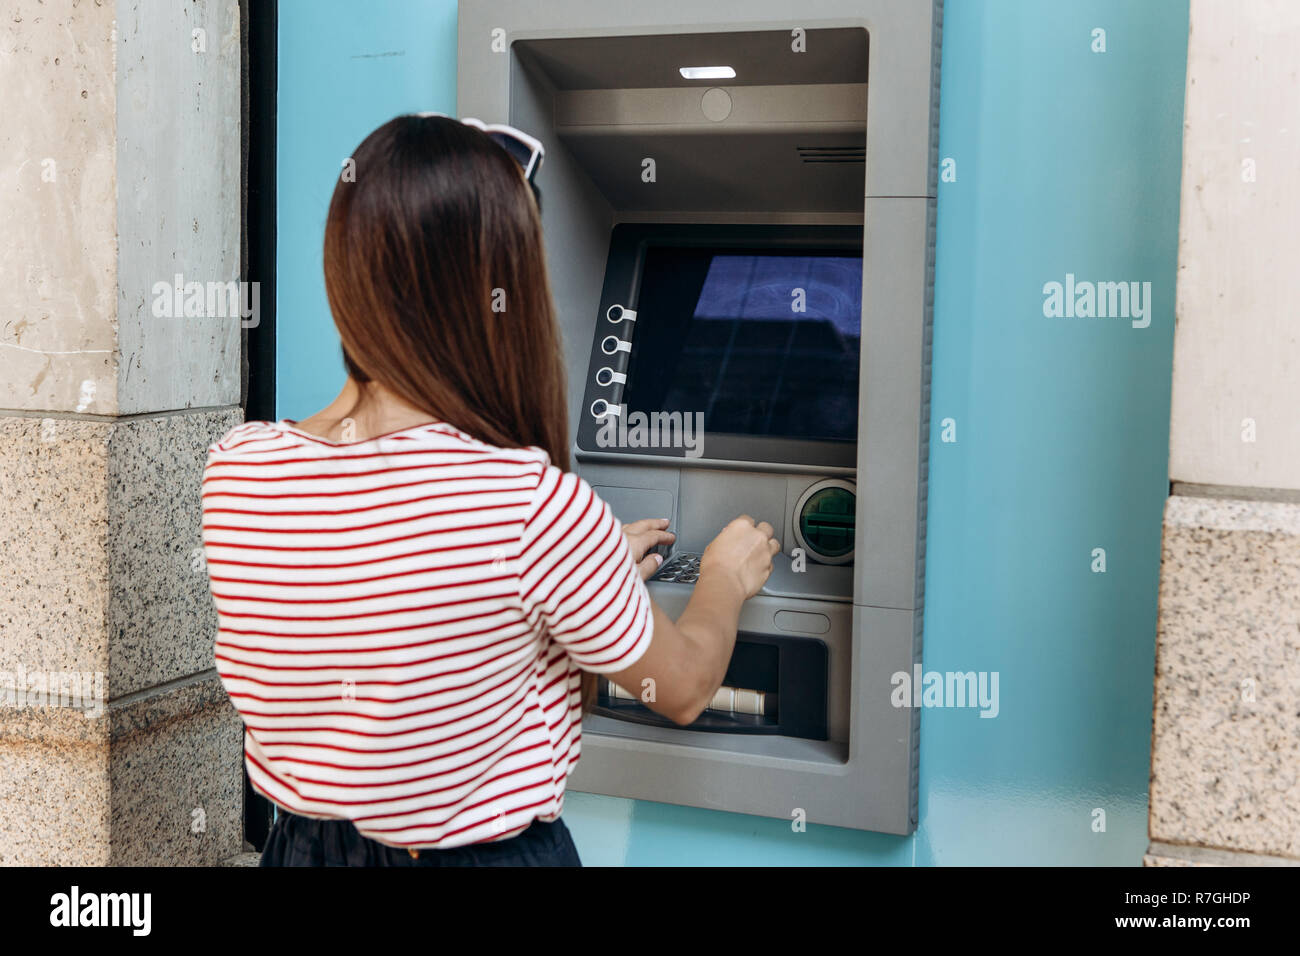 A young woman takes money from an ATM. Finance, credit card, withdrawal of money. Life style. Grabs a card from the ATM. Stock Photo